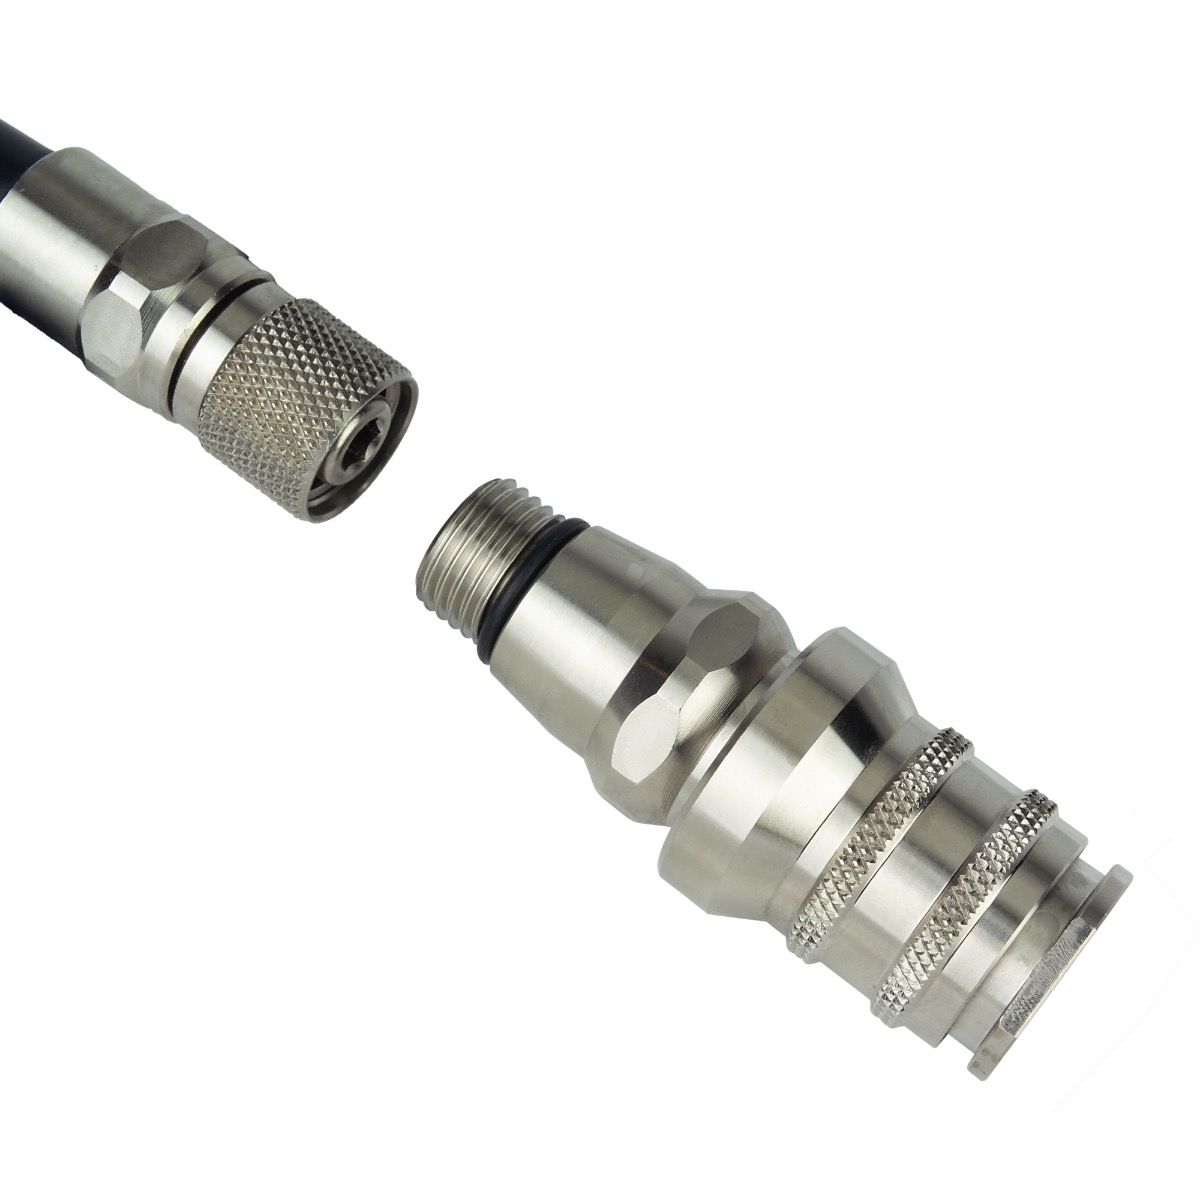 FEMALE GAS CONNECTOR HOSE END (WITH 9/16